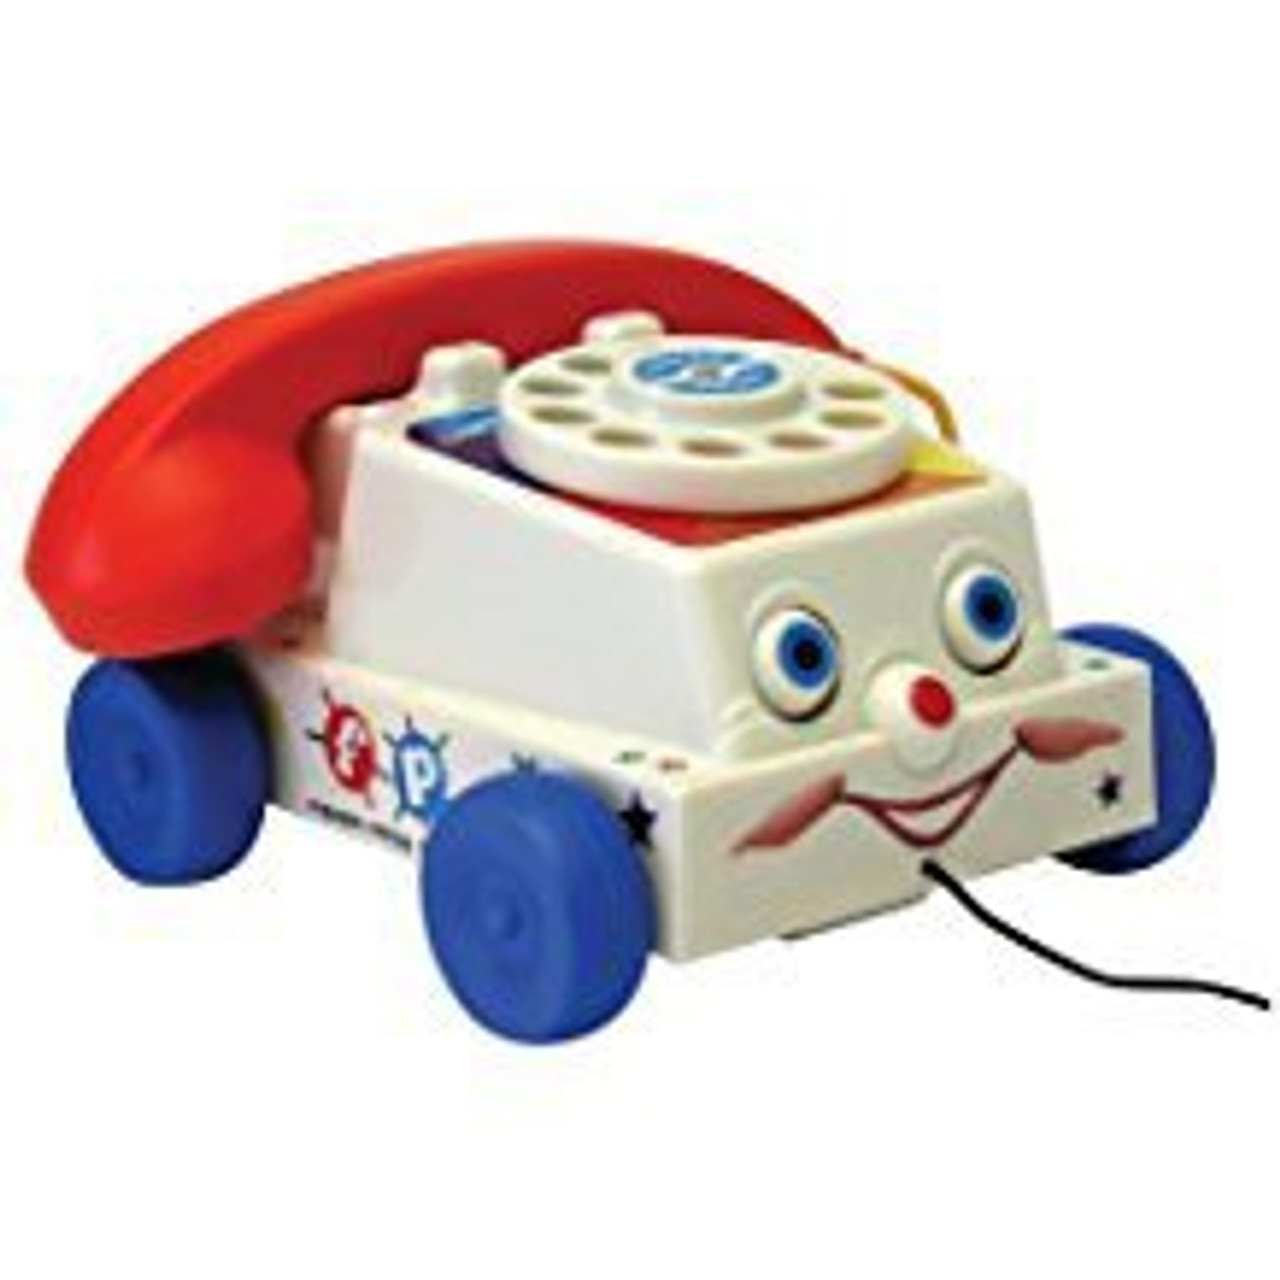 CHATTER TELEPHONE FP